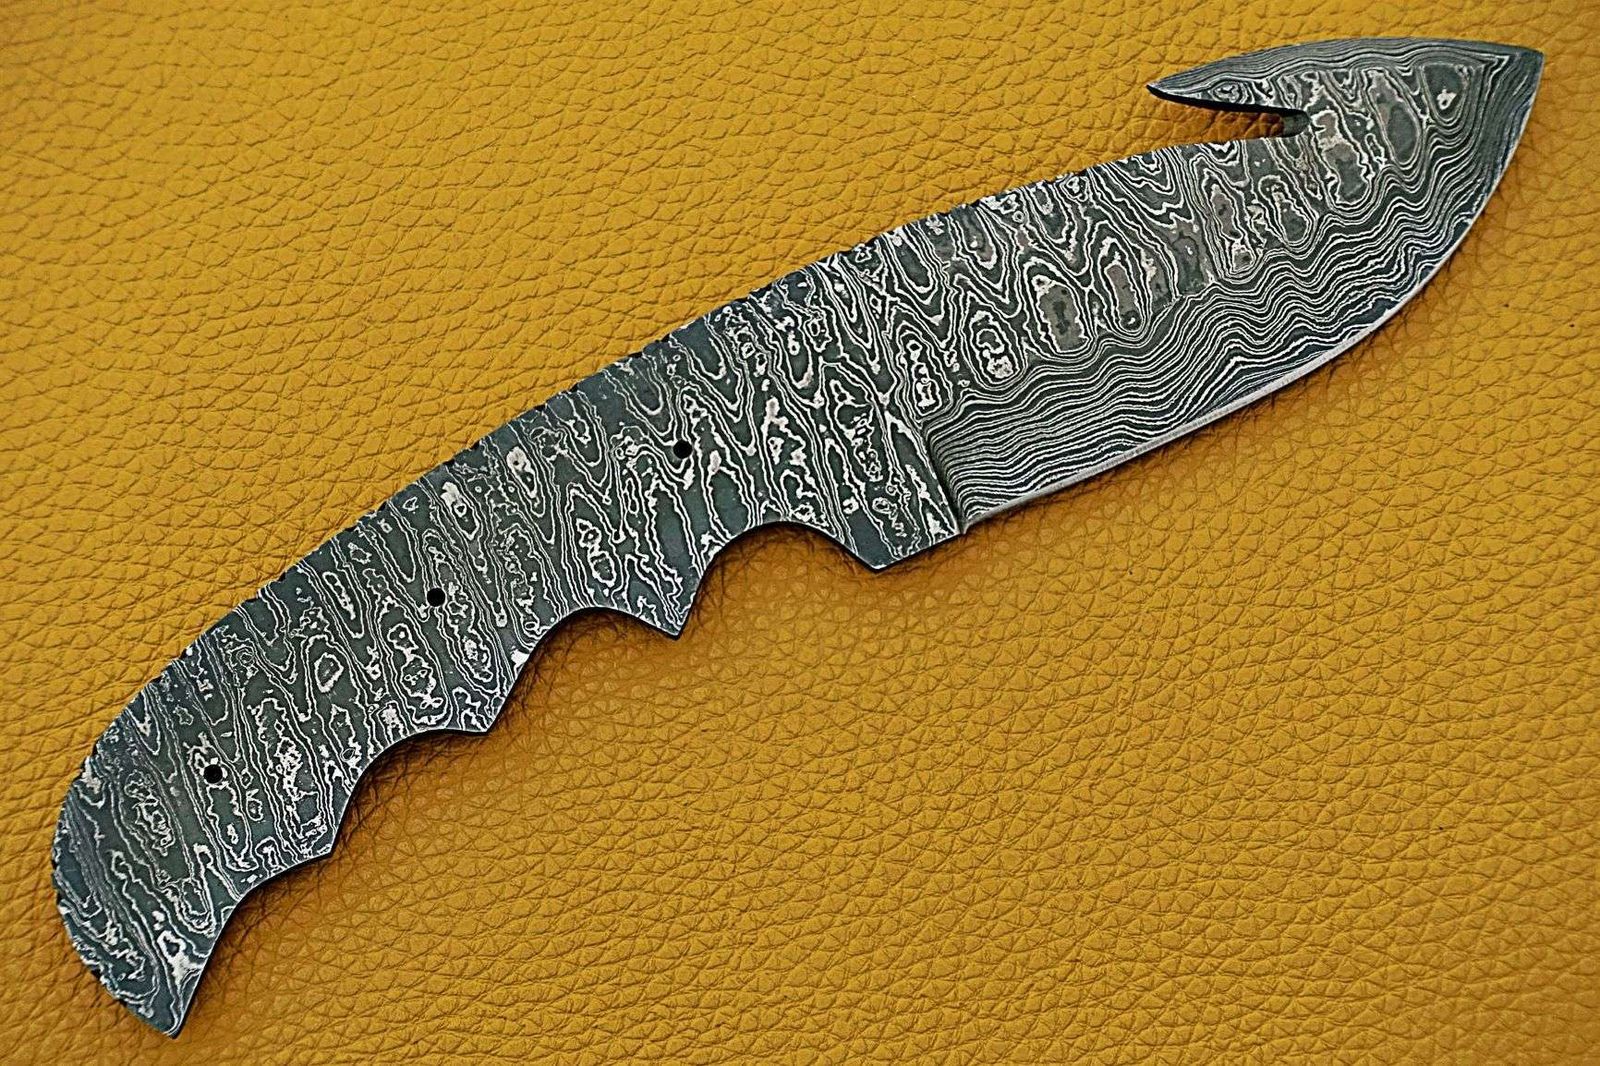 9.5 Inches HAND FORGED Special Feather Damascus Steel Hunting